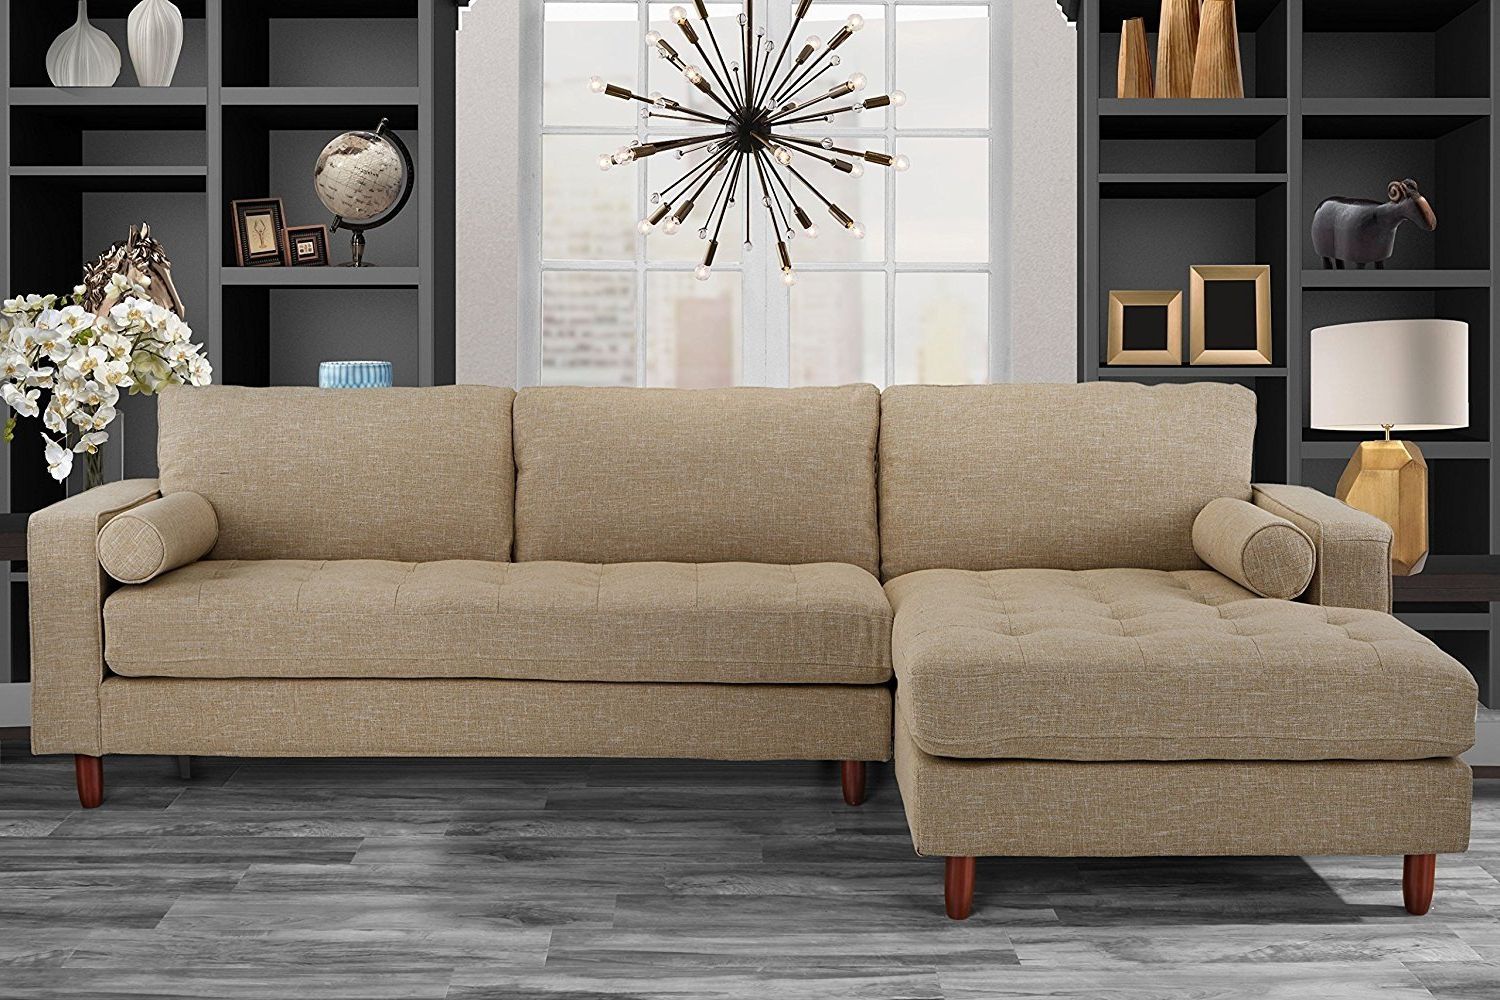 Mid Century Modern Tufted Fabric Sectional Sofa, L Shape Couch Beige Pertaining To Small L Shaped Sectional Sofas In Beige (Gallery 5 of 20)